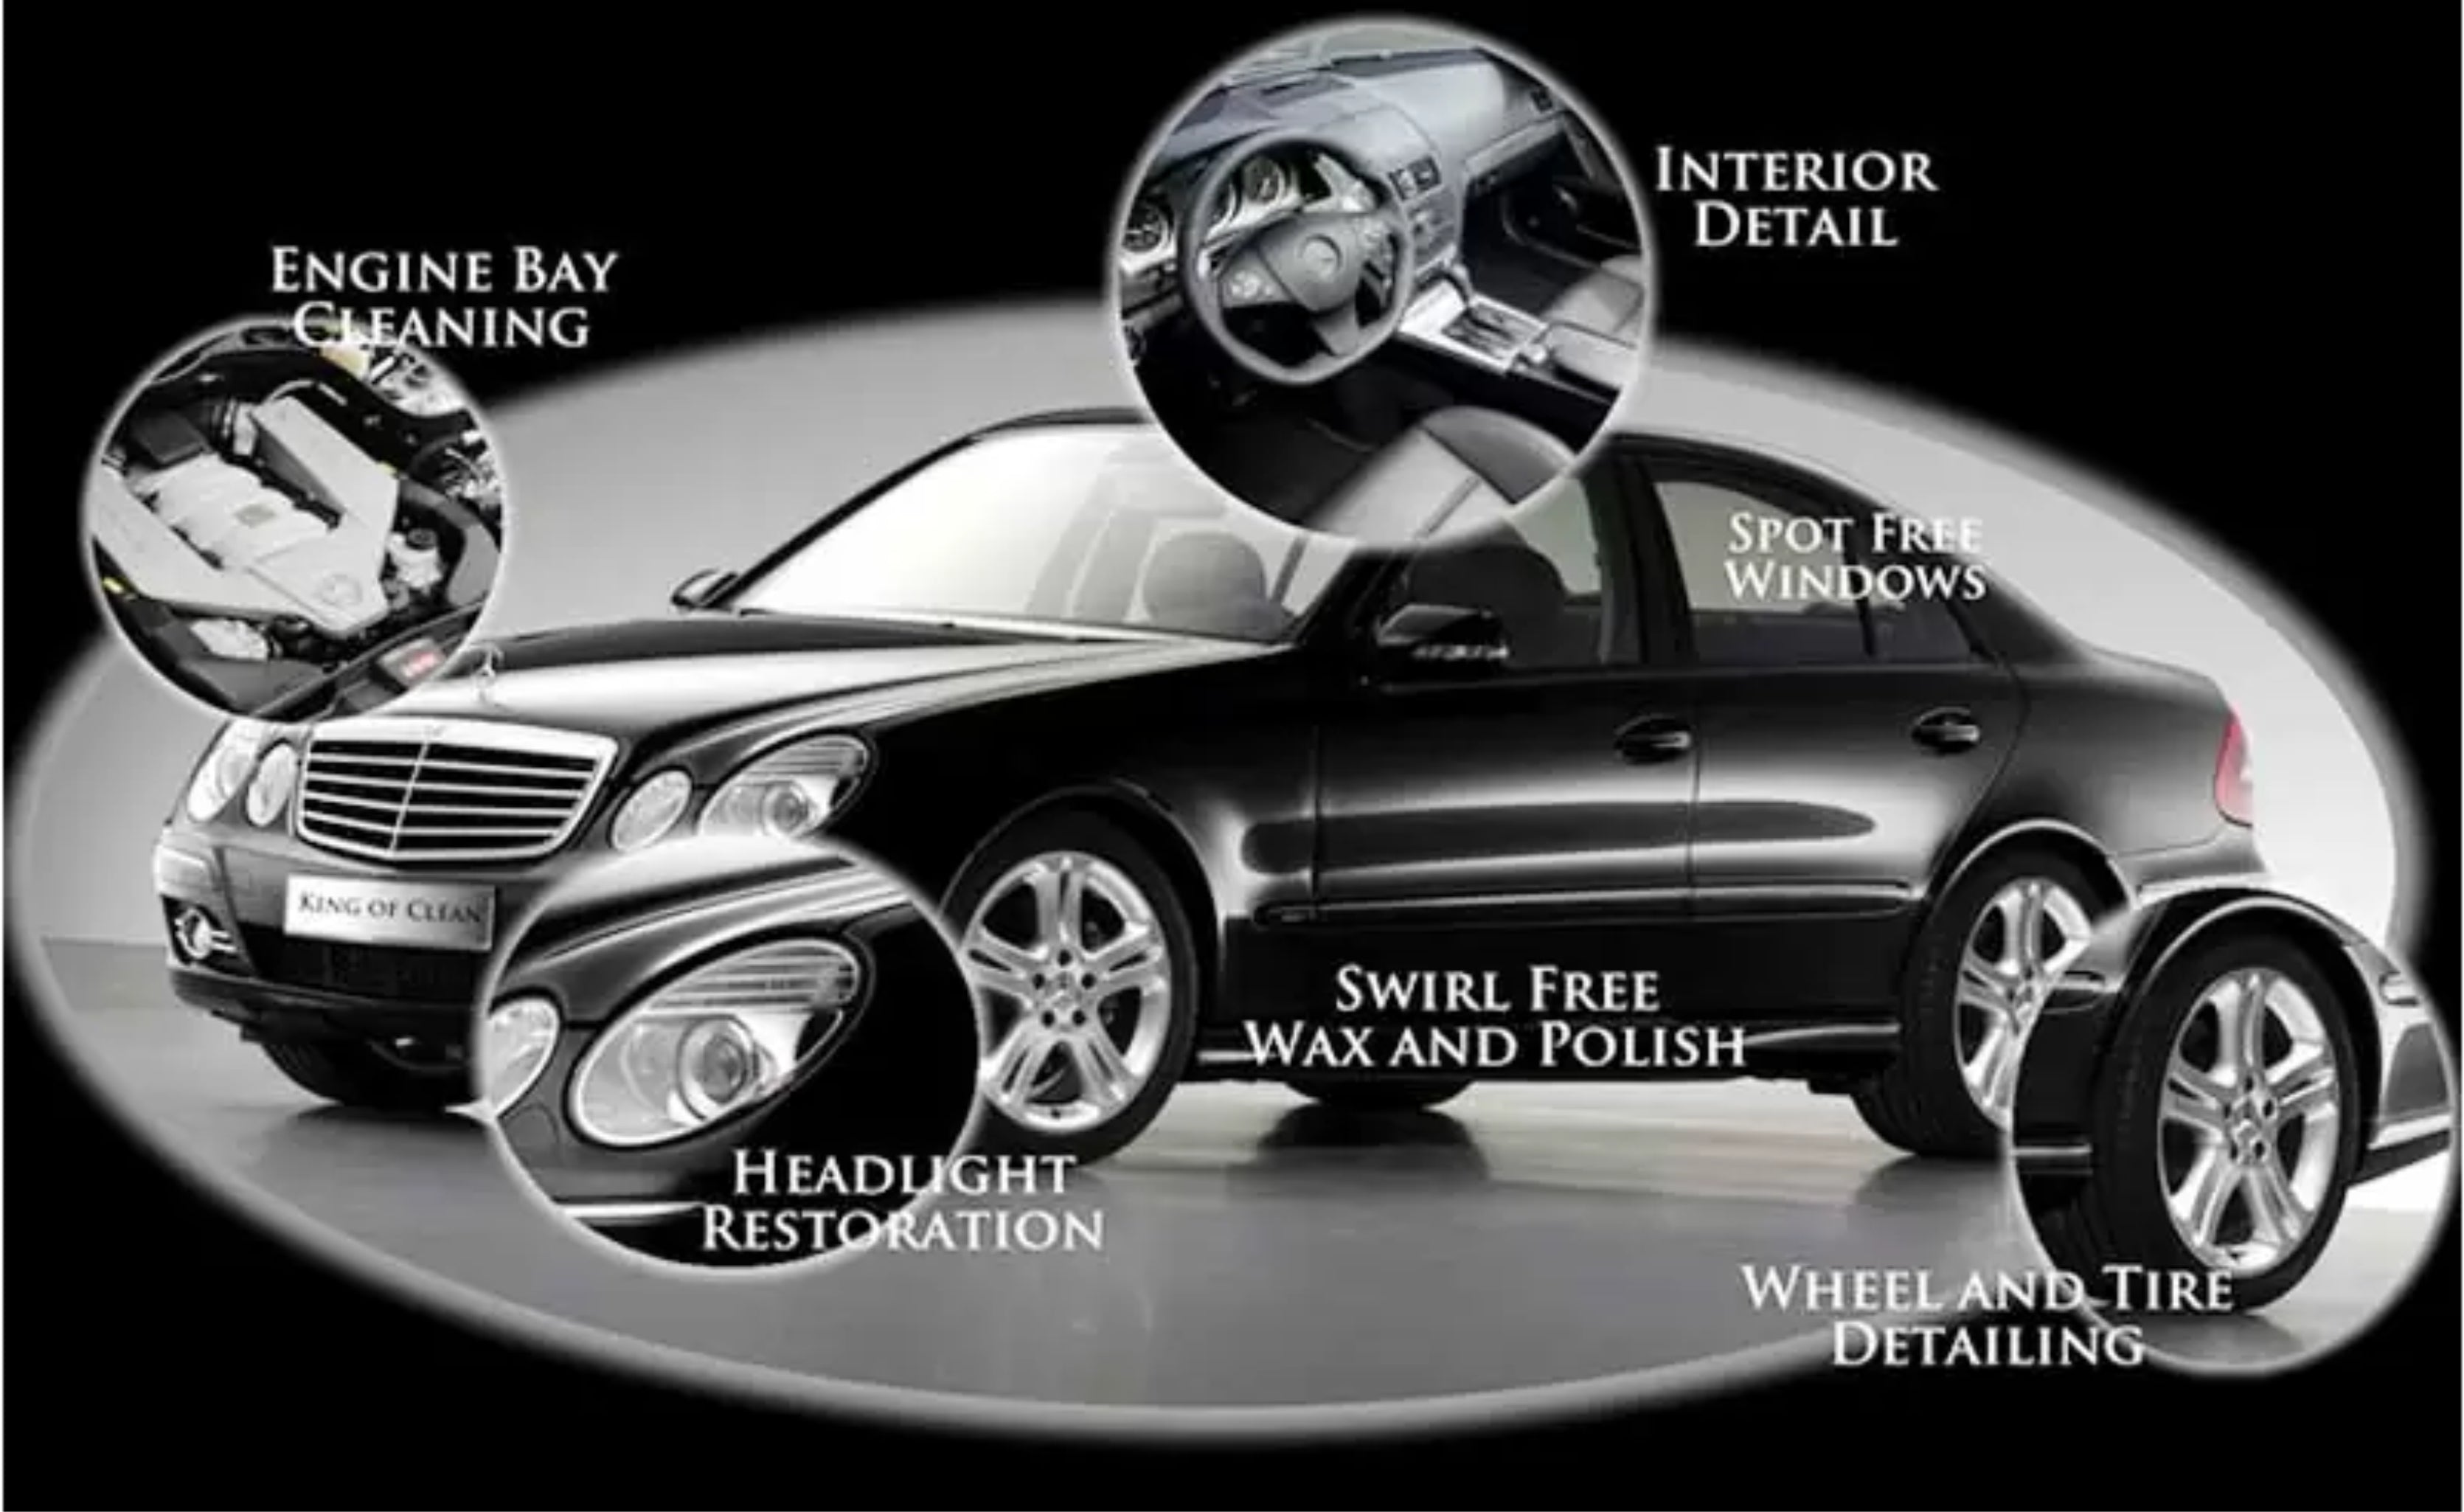 About us - Car Care Products